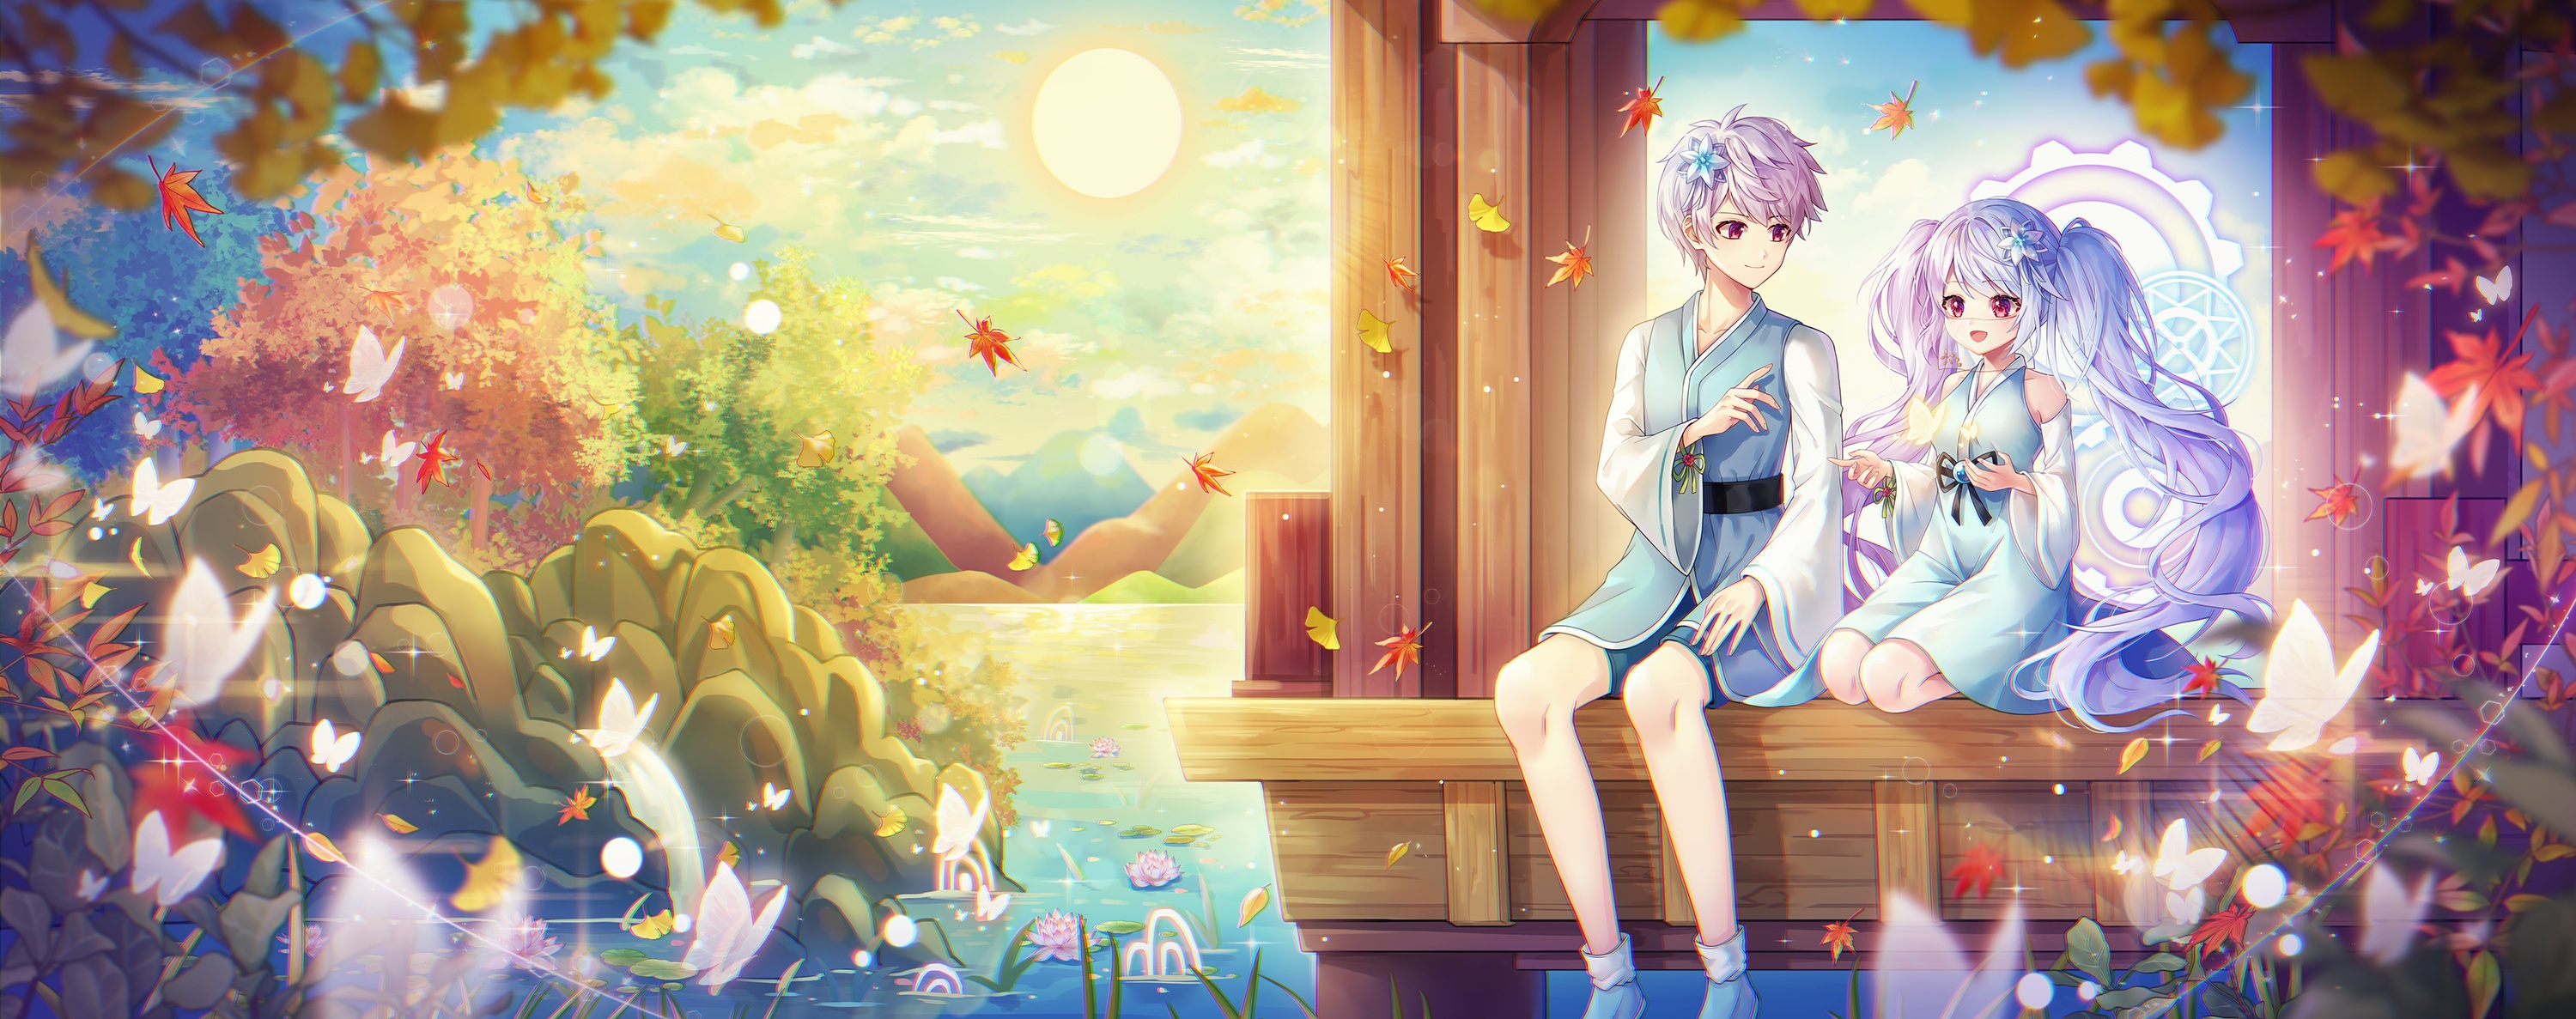 Photo free dress, wallpaper anime girl and boy, clouds